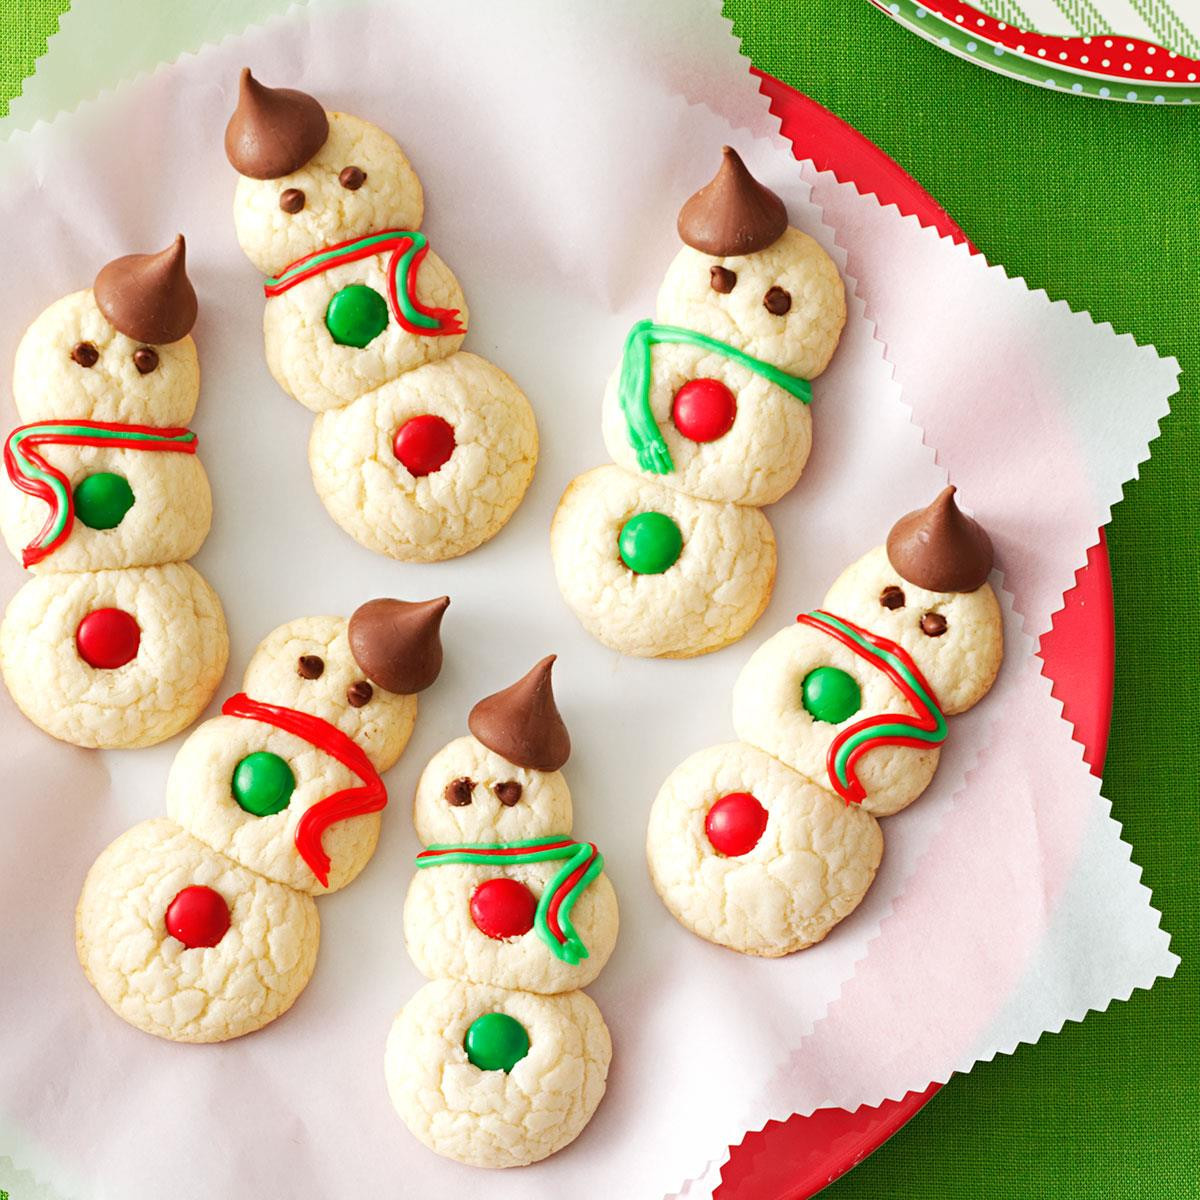 Cute Holiday Desserts
 Snowman Cookies Recipe